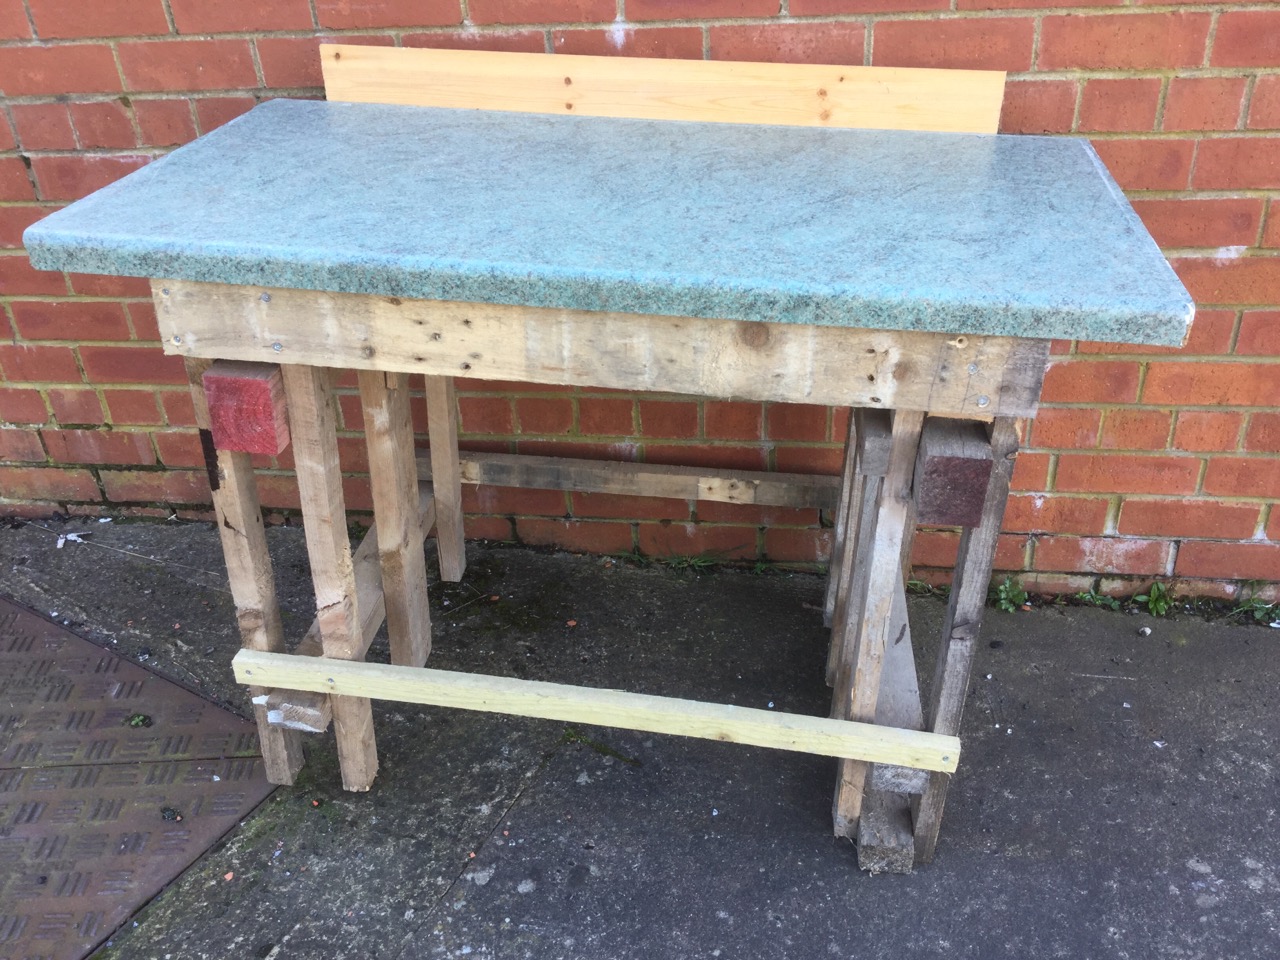 A homemade workbench with rectangular top supported on batton legs.